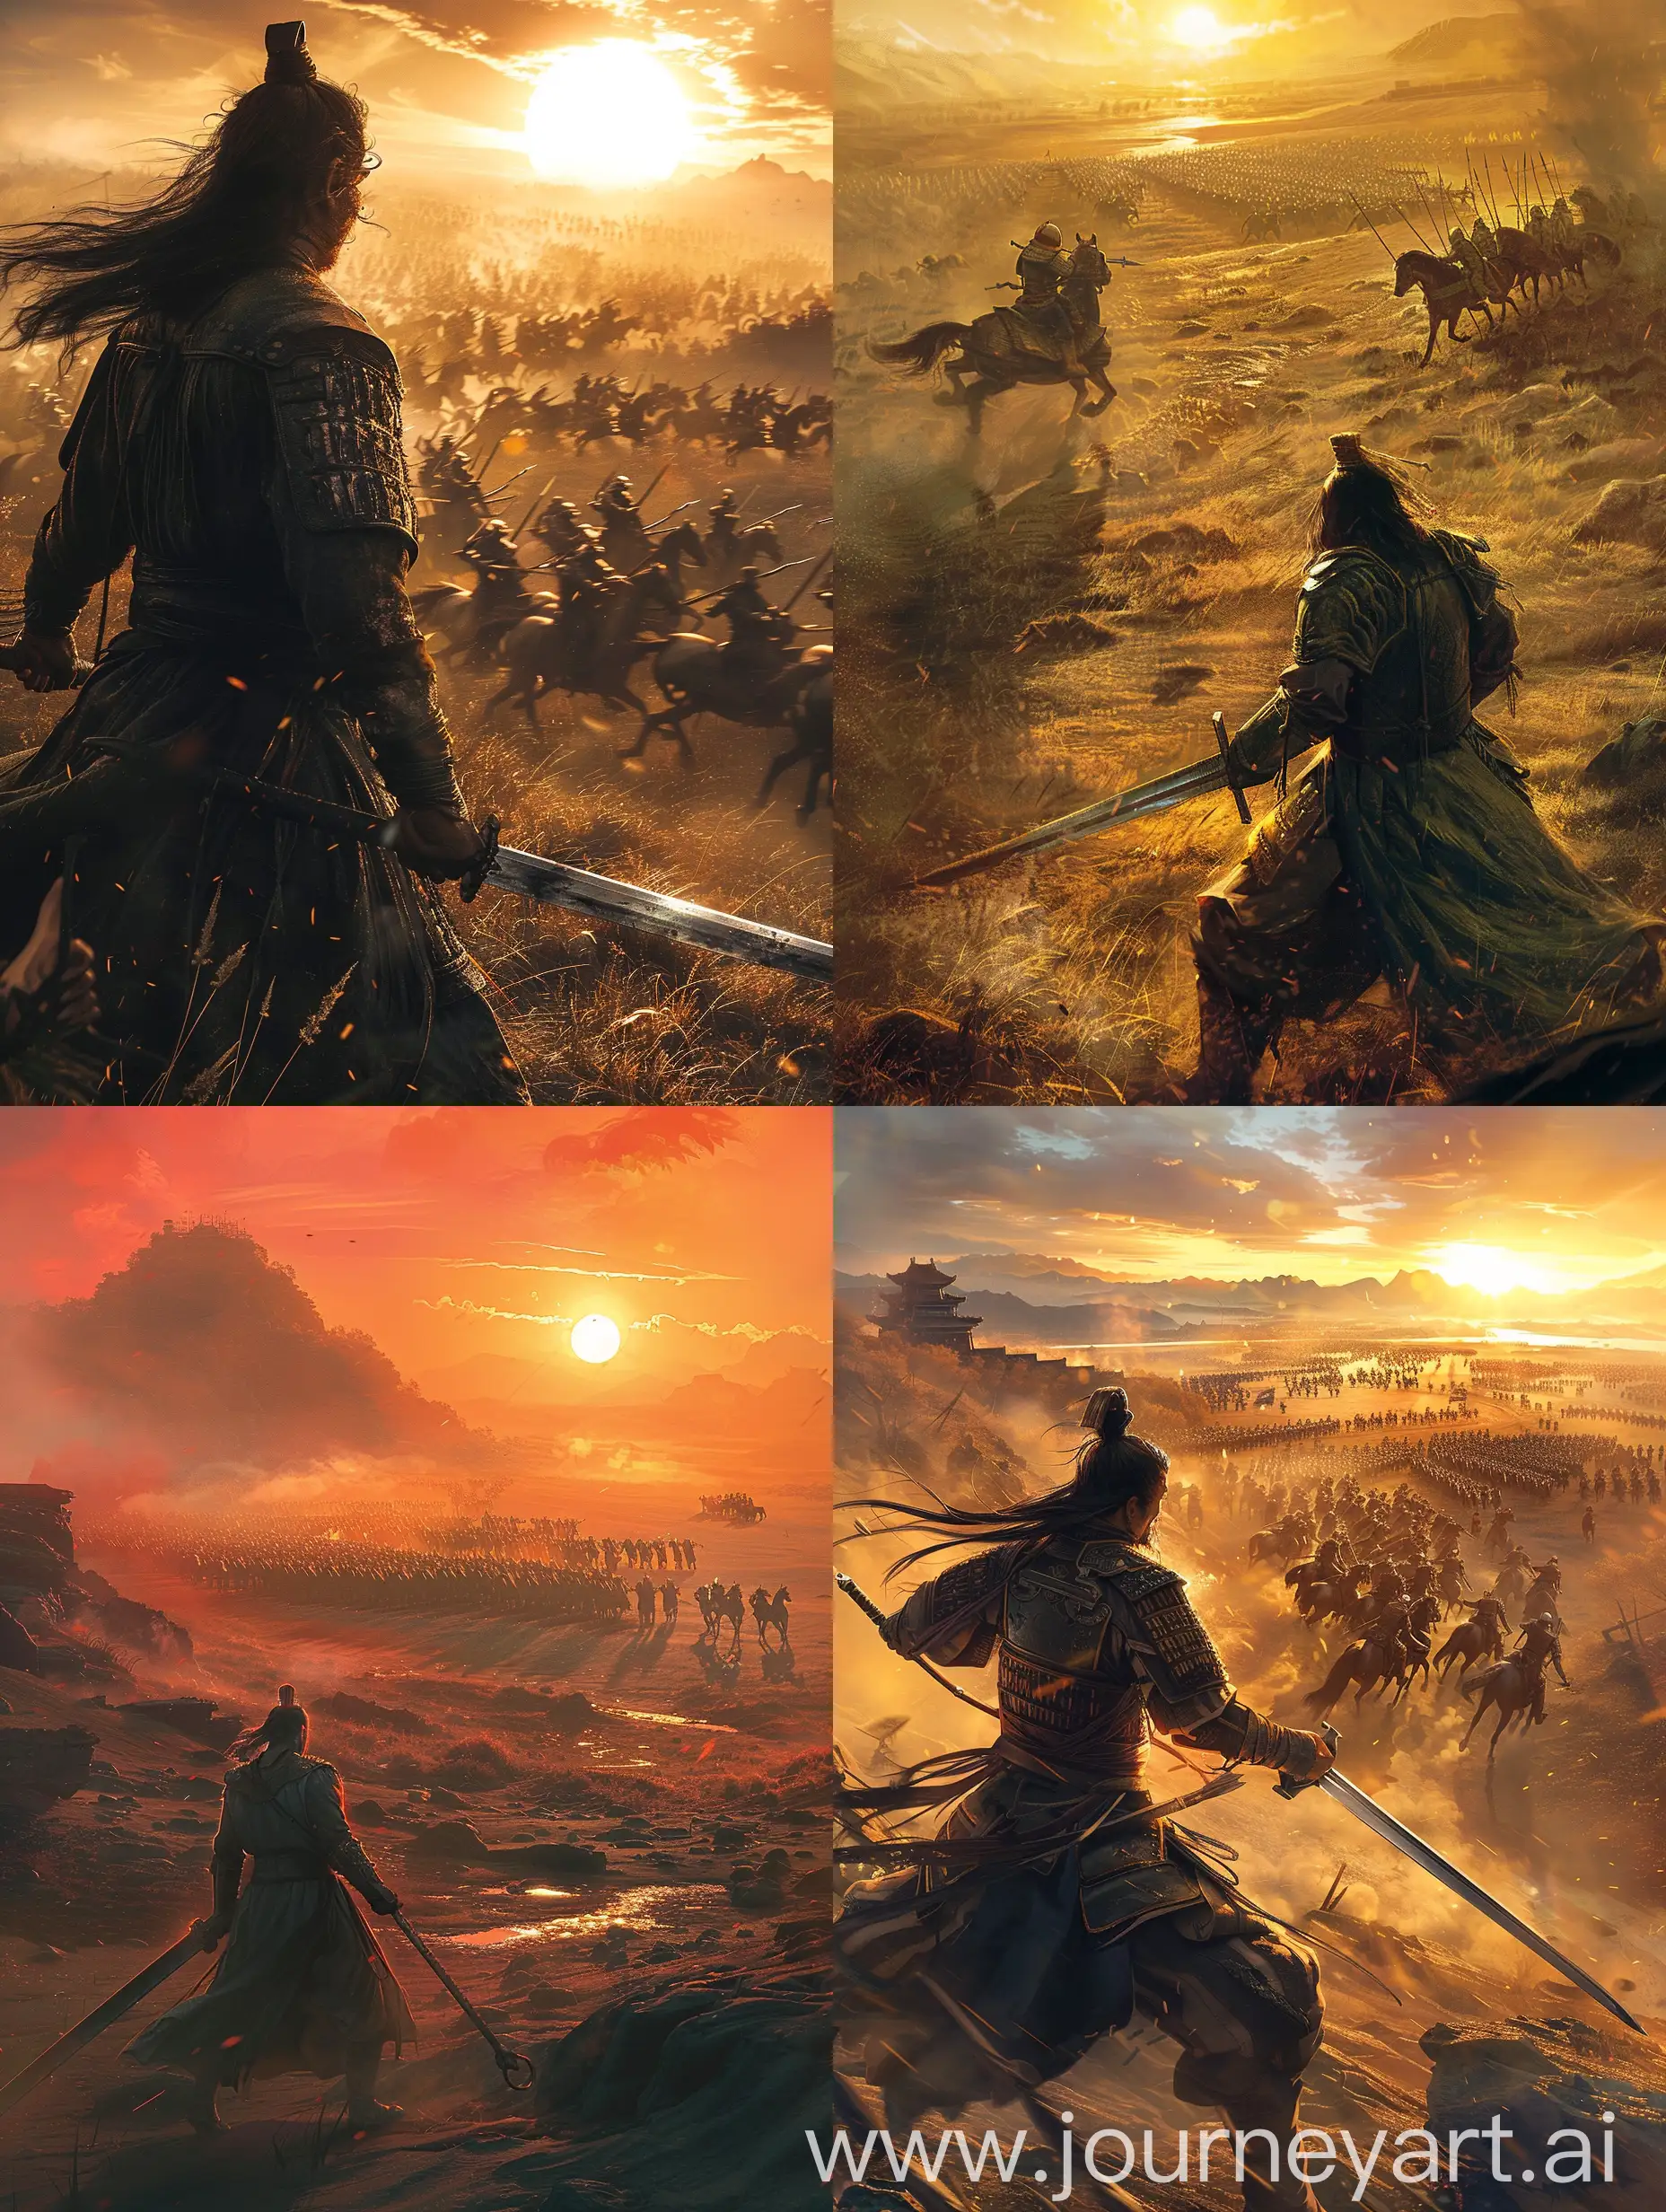 Lonely-Chinese-Warrior-Faces-Charging-Horsemen-at-Sunset